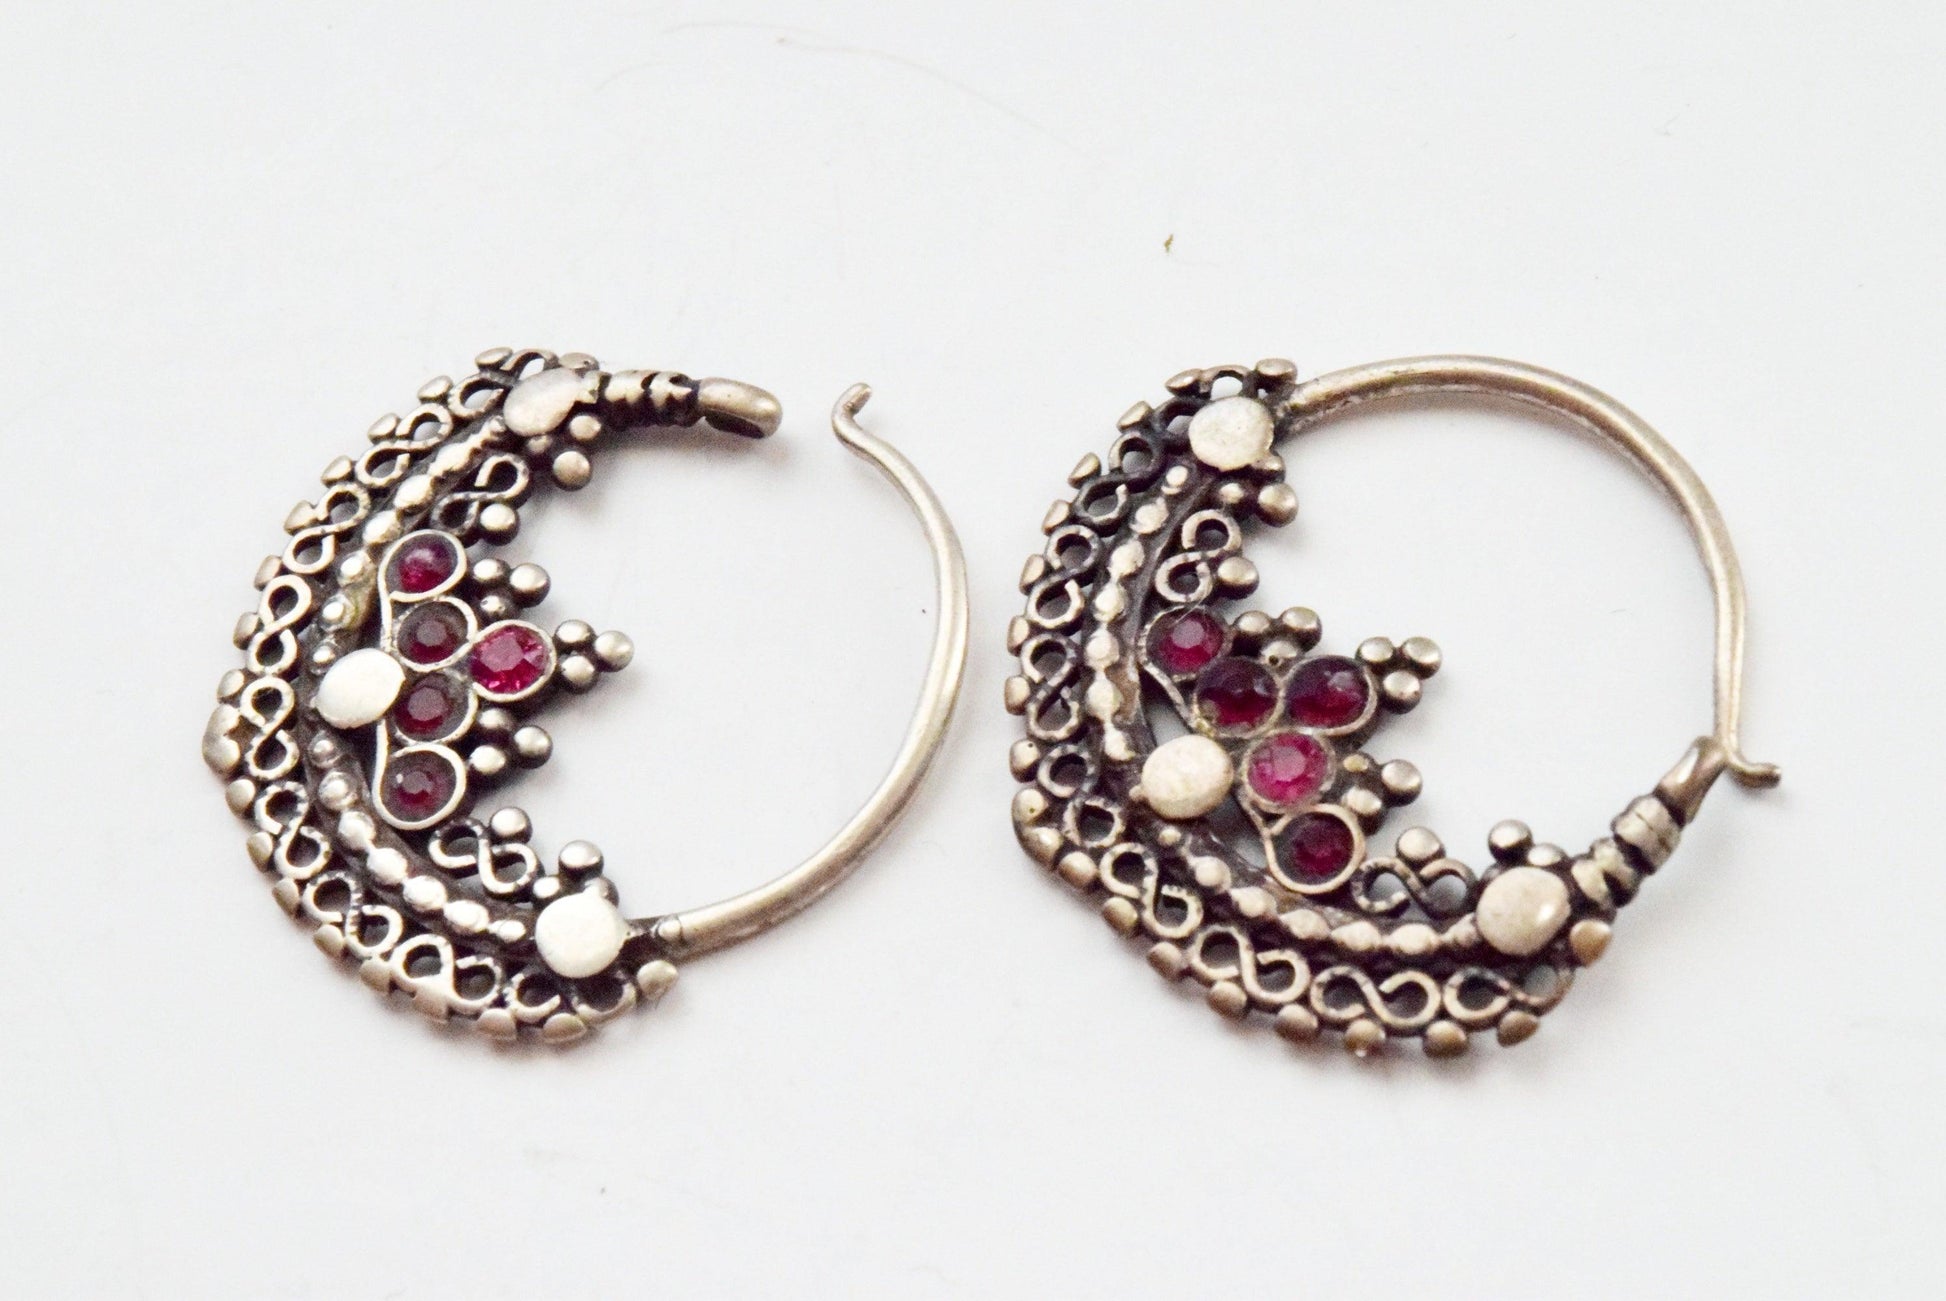 Vintage Small Silver Pashtun Hoop Earrings with Pink Paste - Anteeka